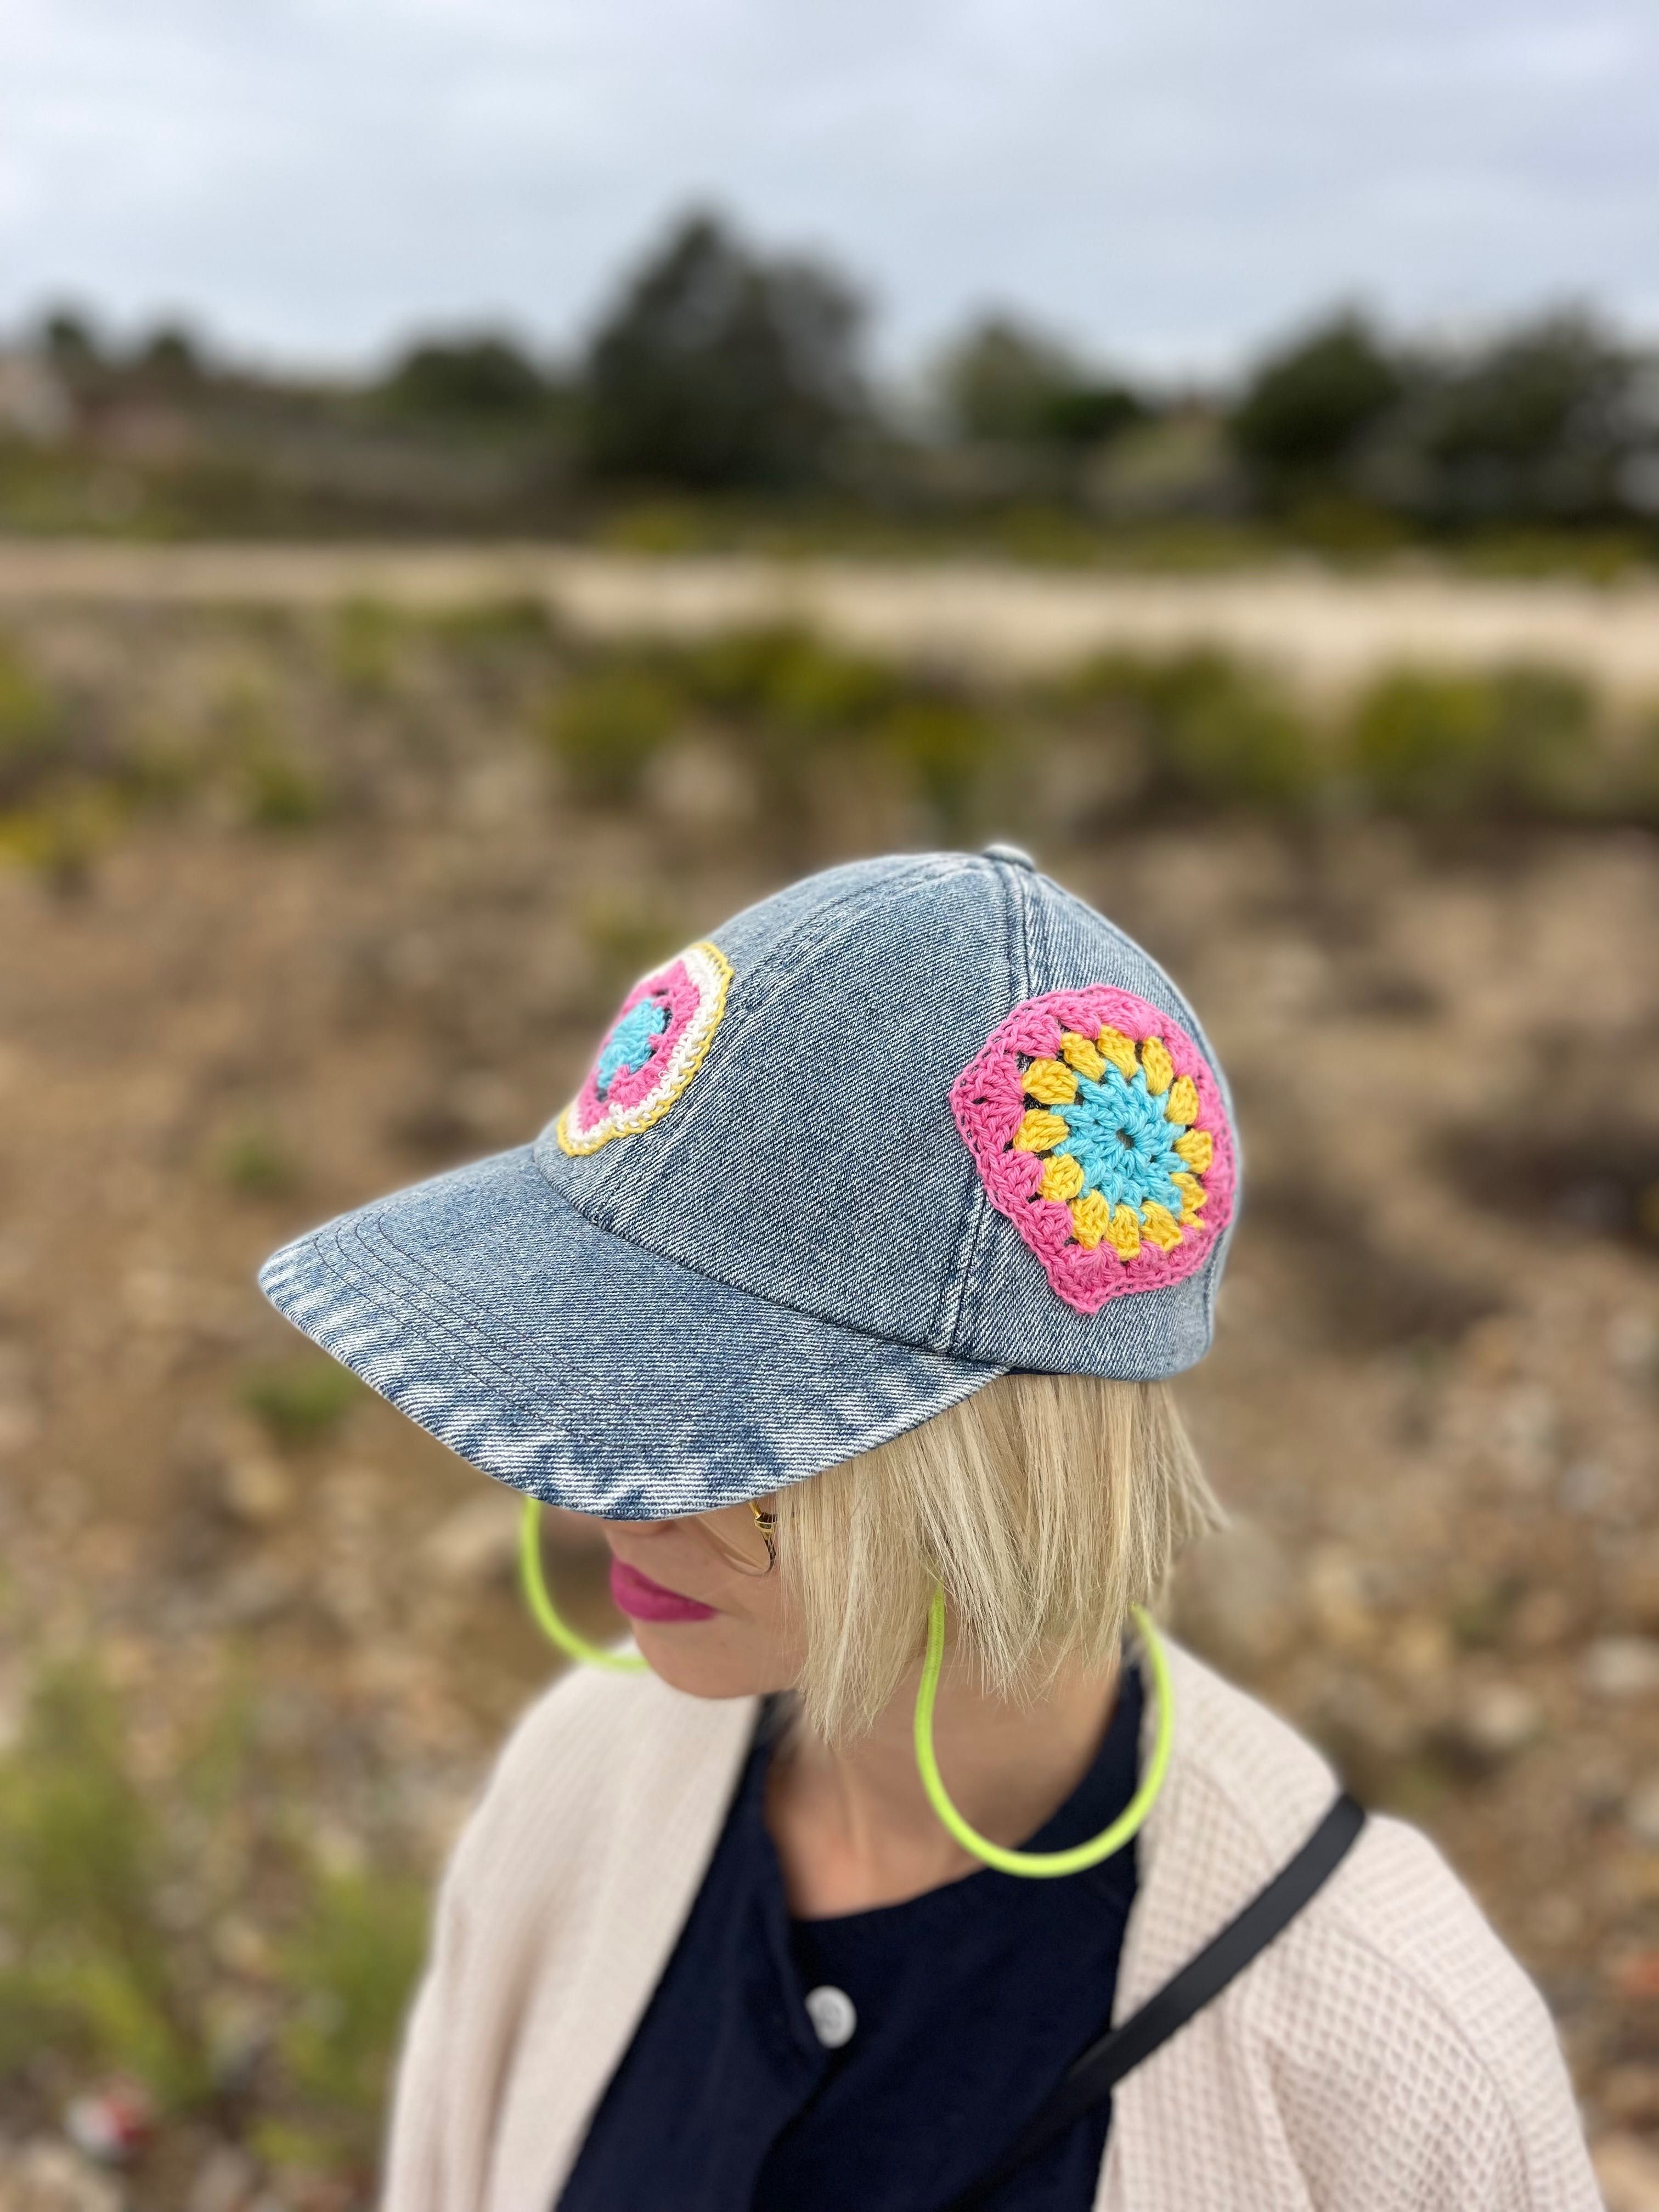 Customized denim cap with knitted flower patches don.bacon